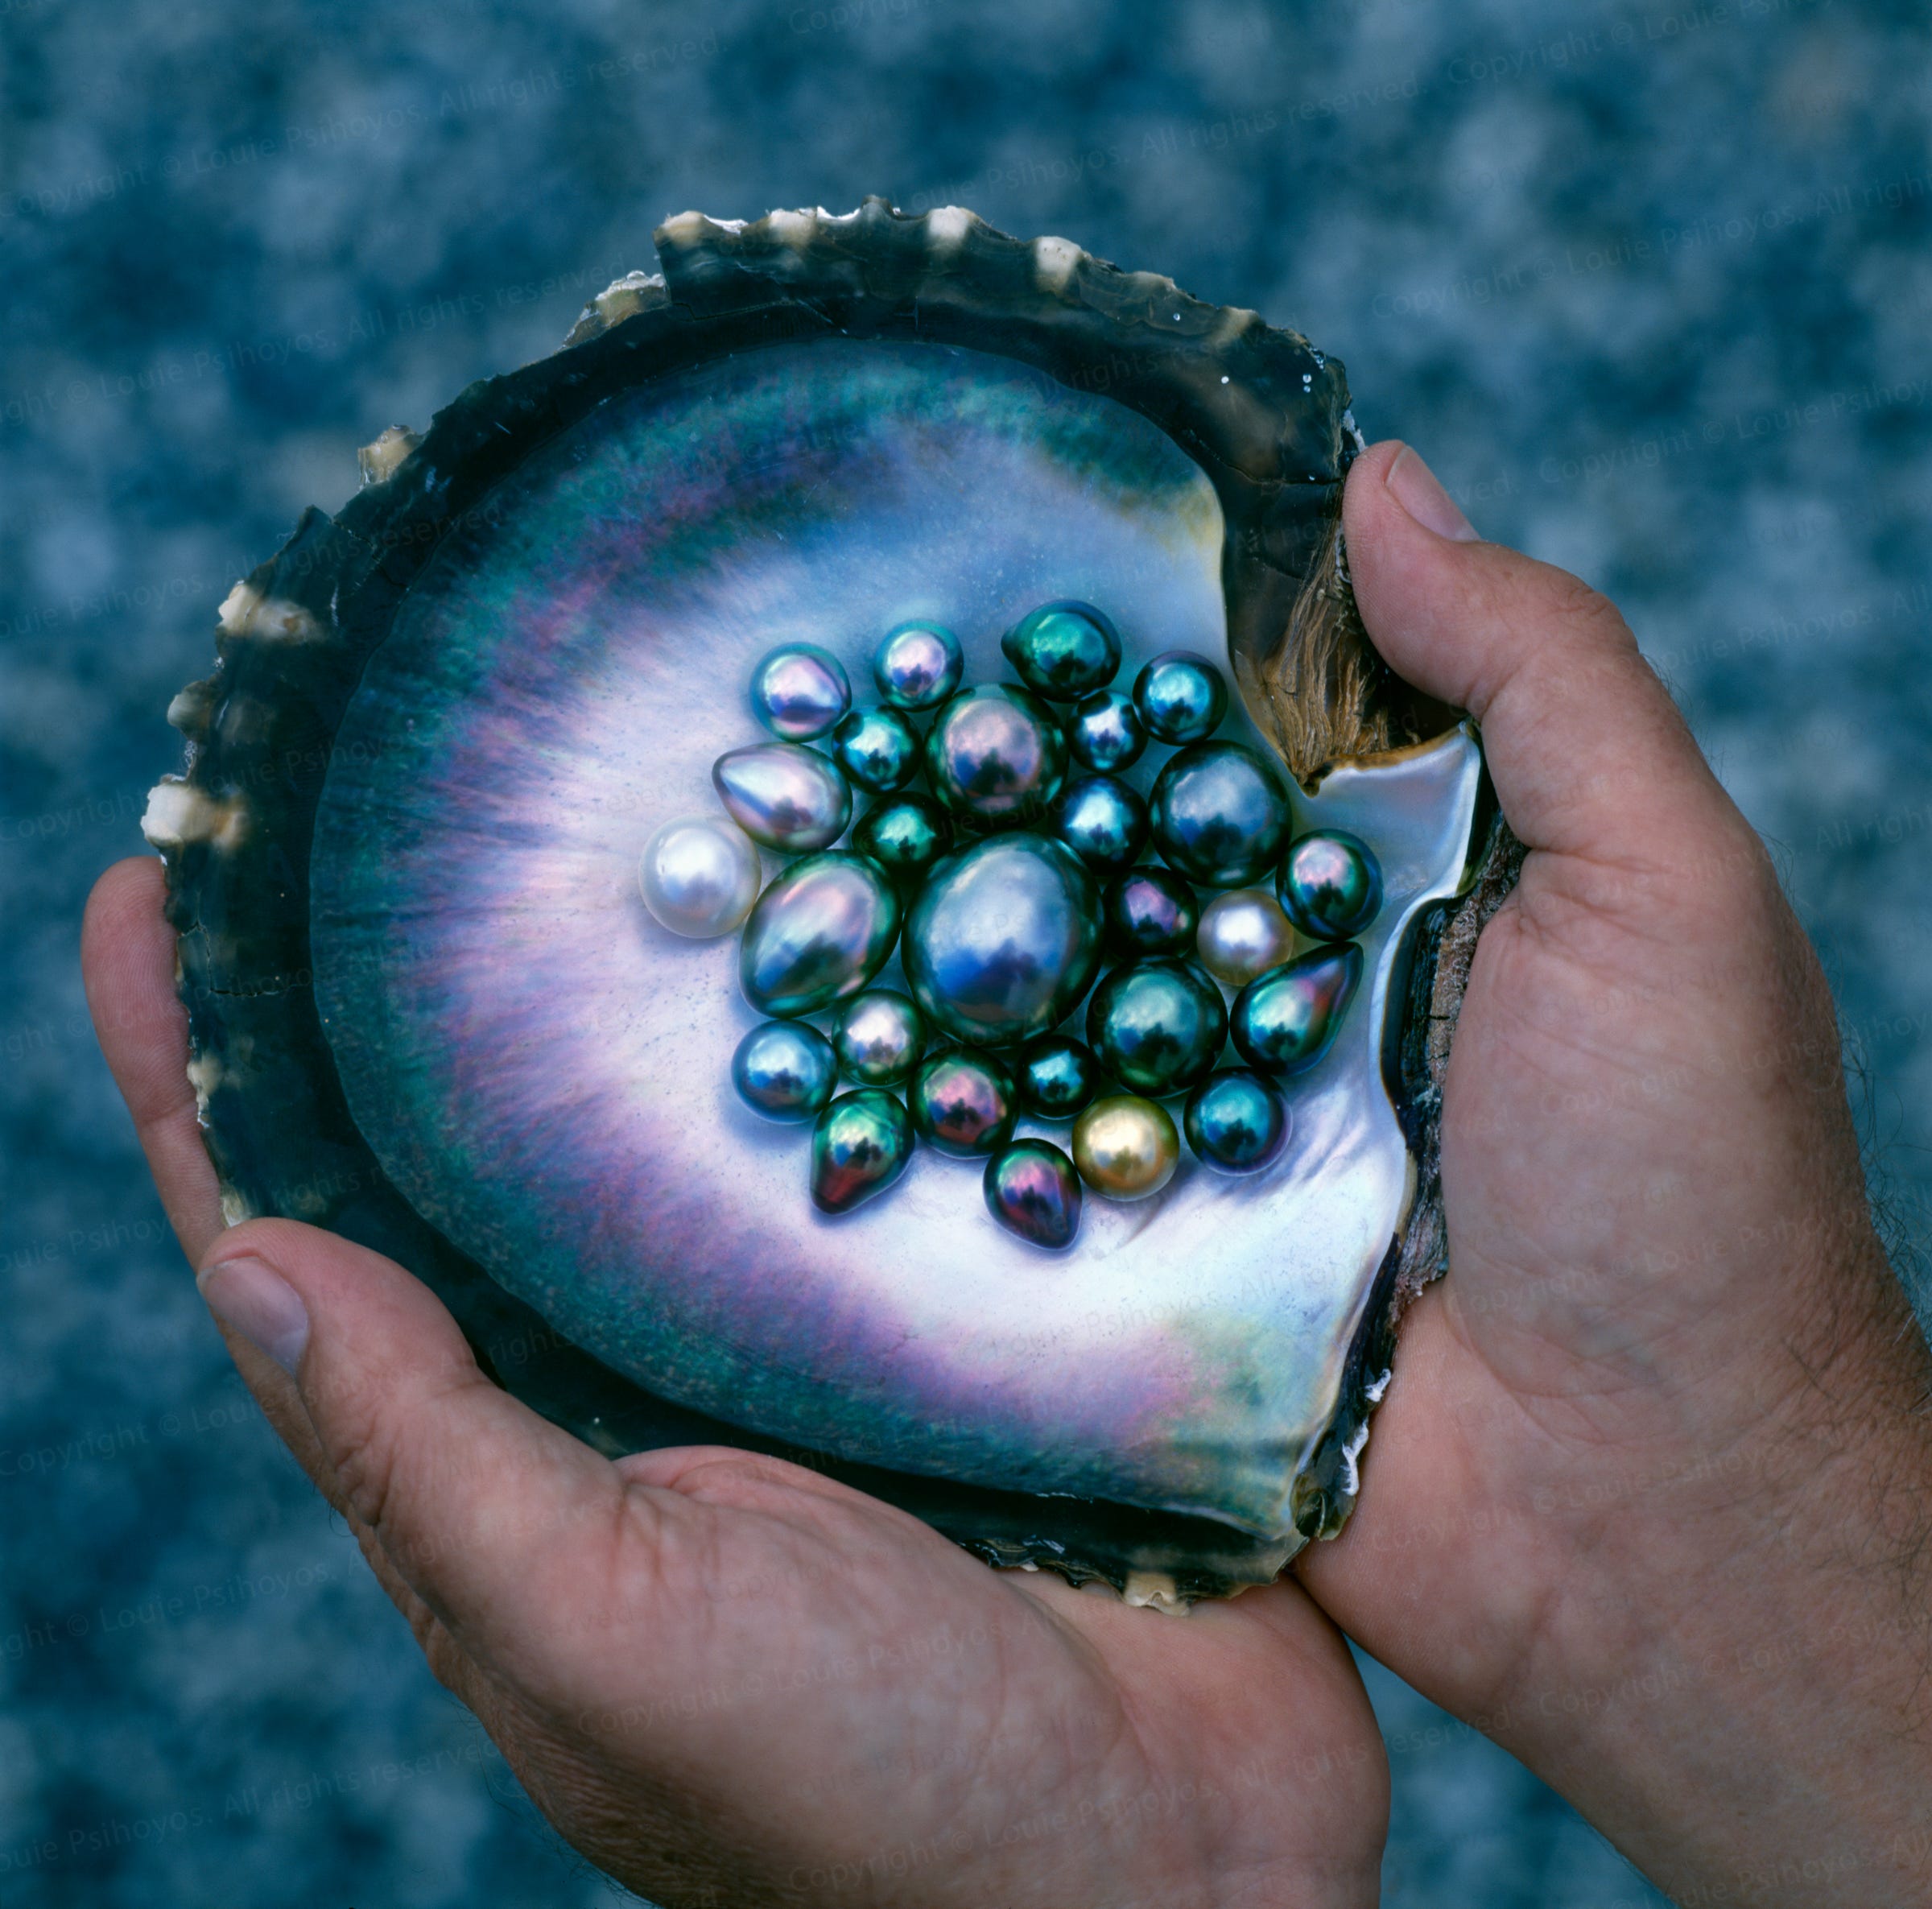 Freshwater pearls: river beauties that come in many shapes and colors